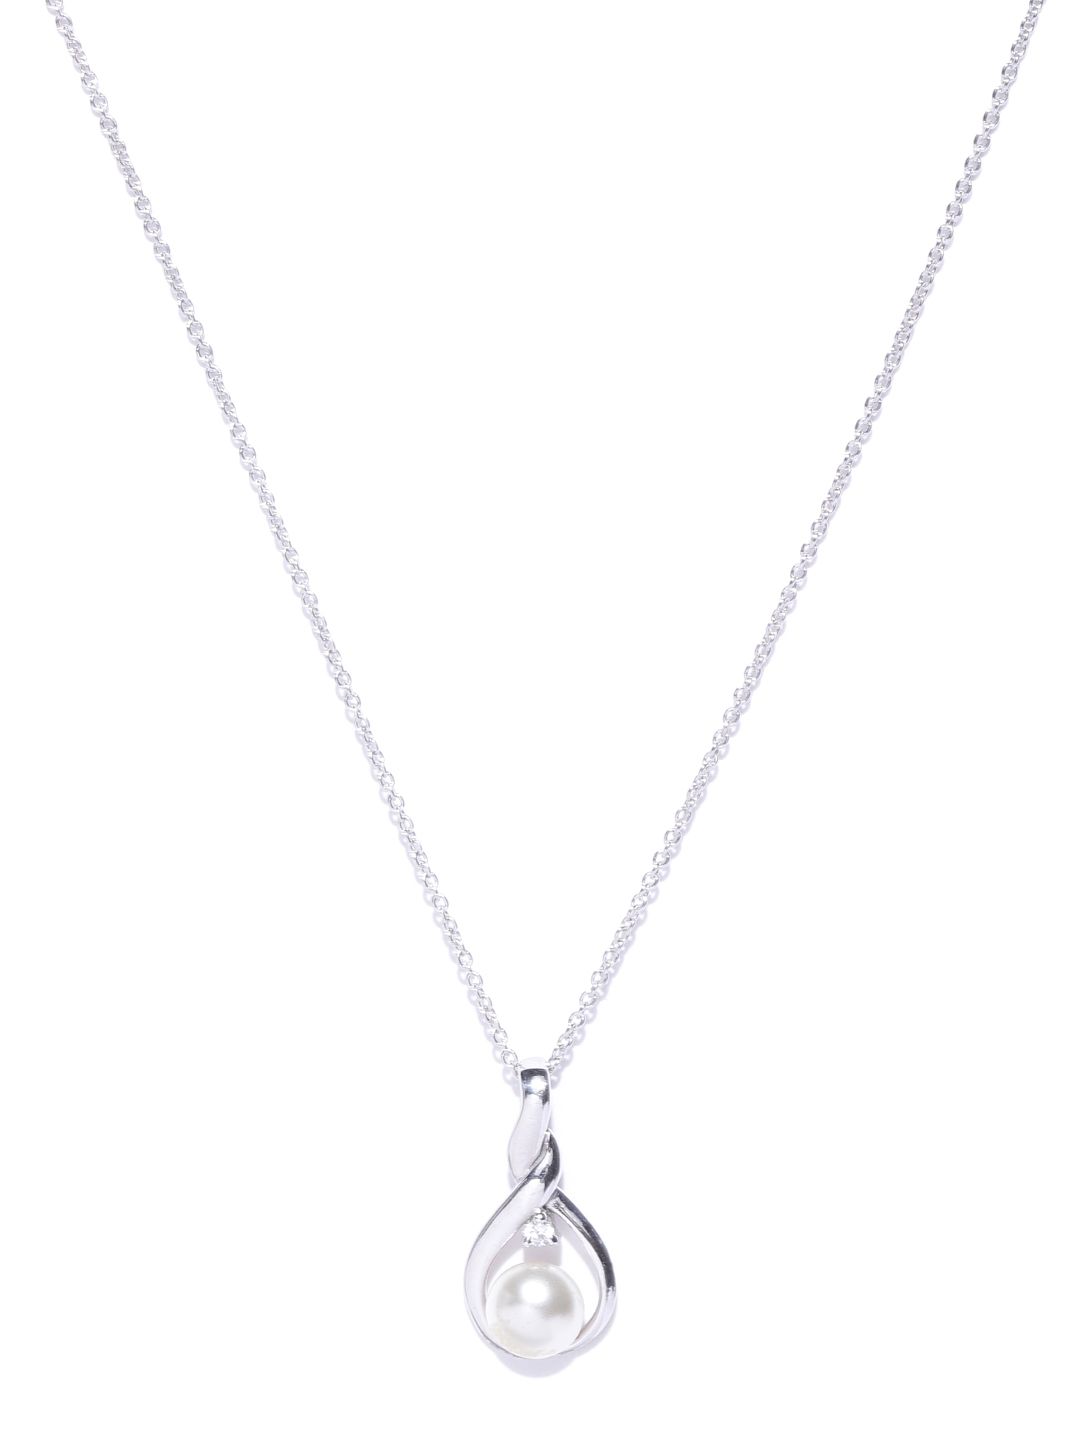 Carlton London Rhodium-Plated 925 Sterling Silver Necklace Price in India